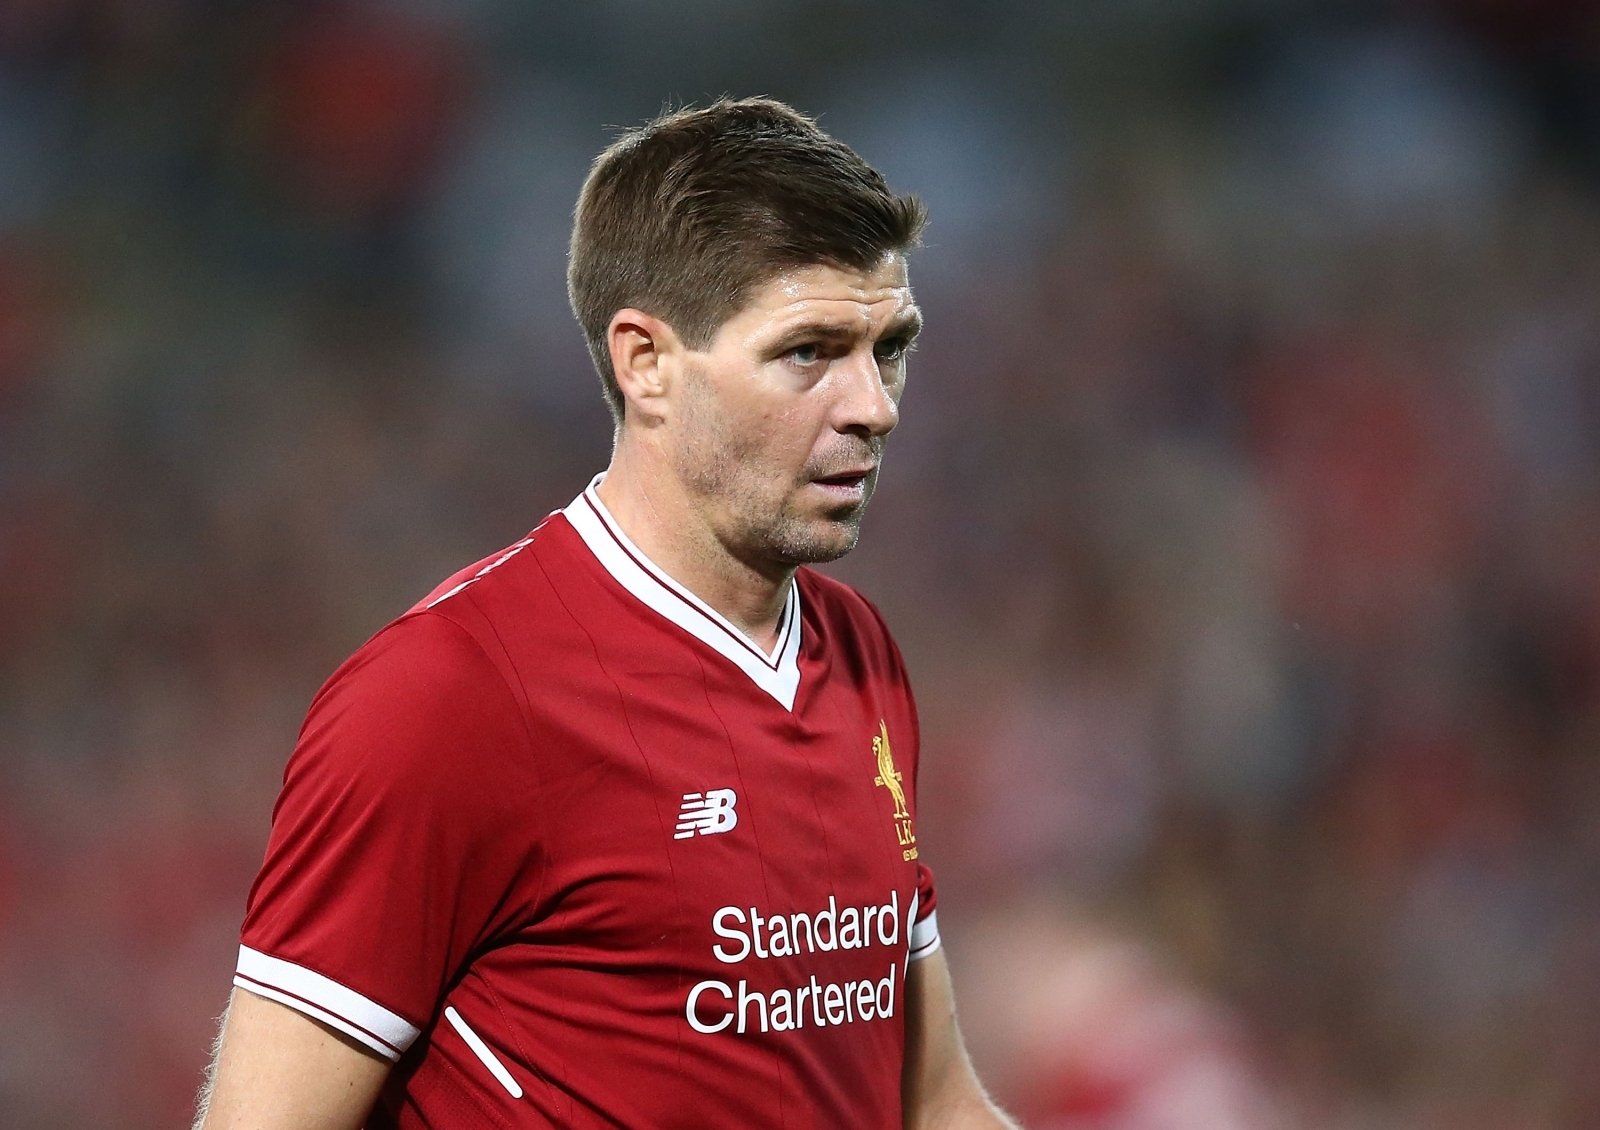 Steven Gerrard reveals the one Manchester United player he 